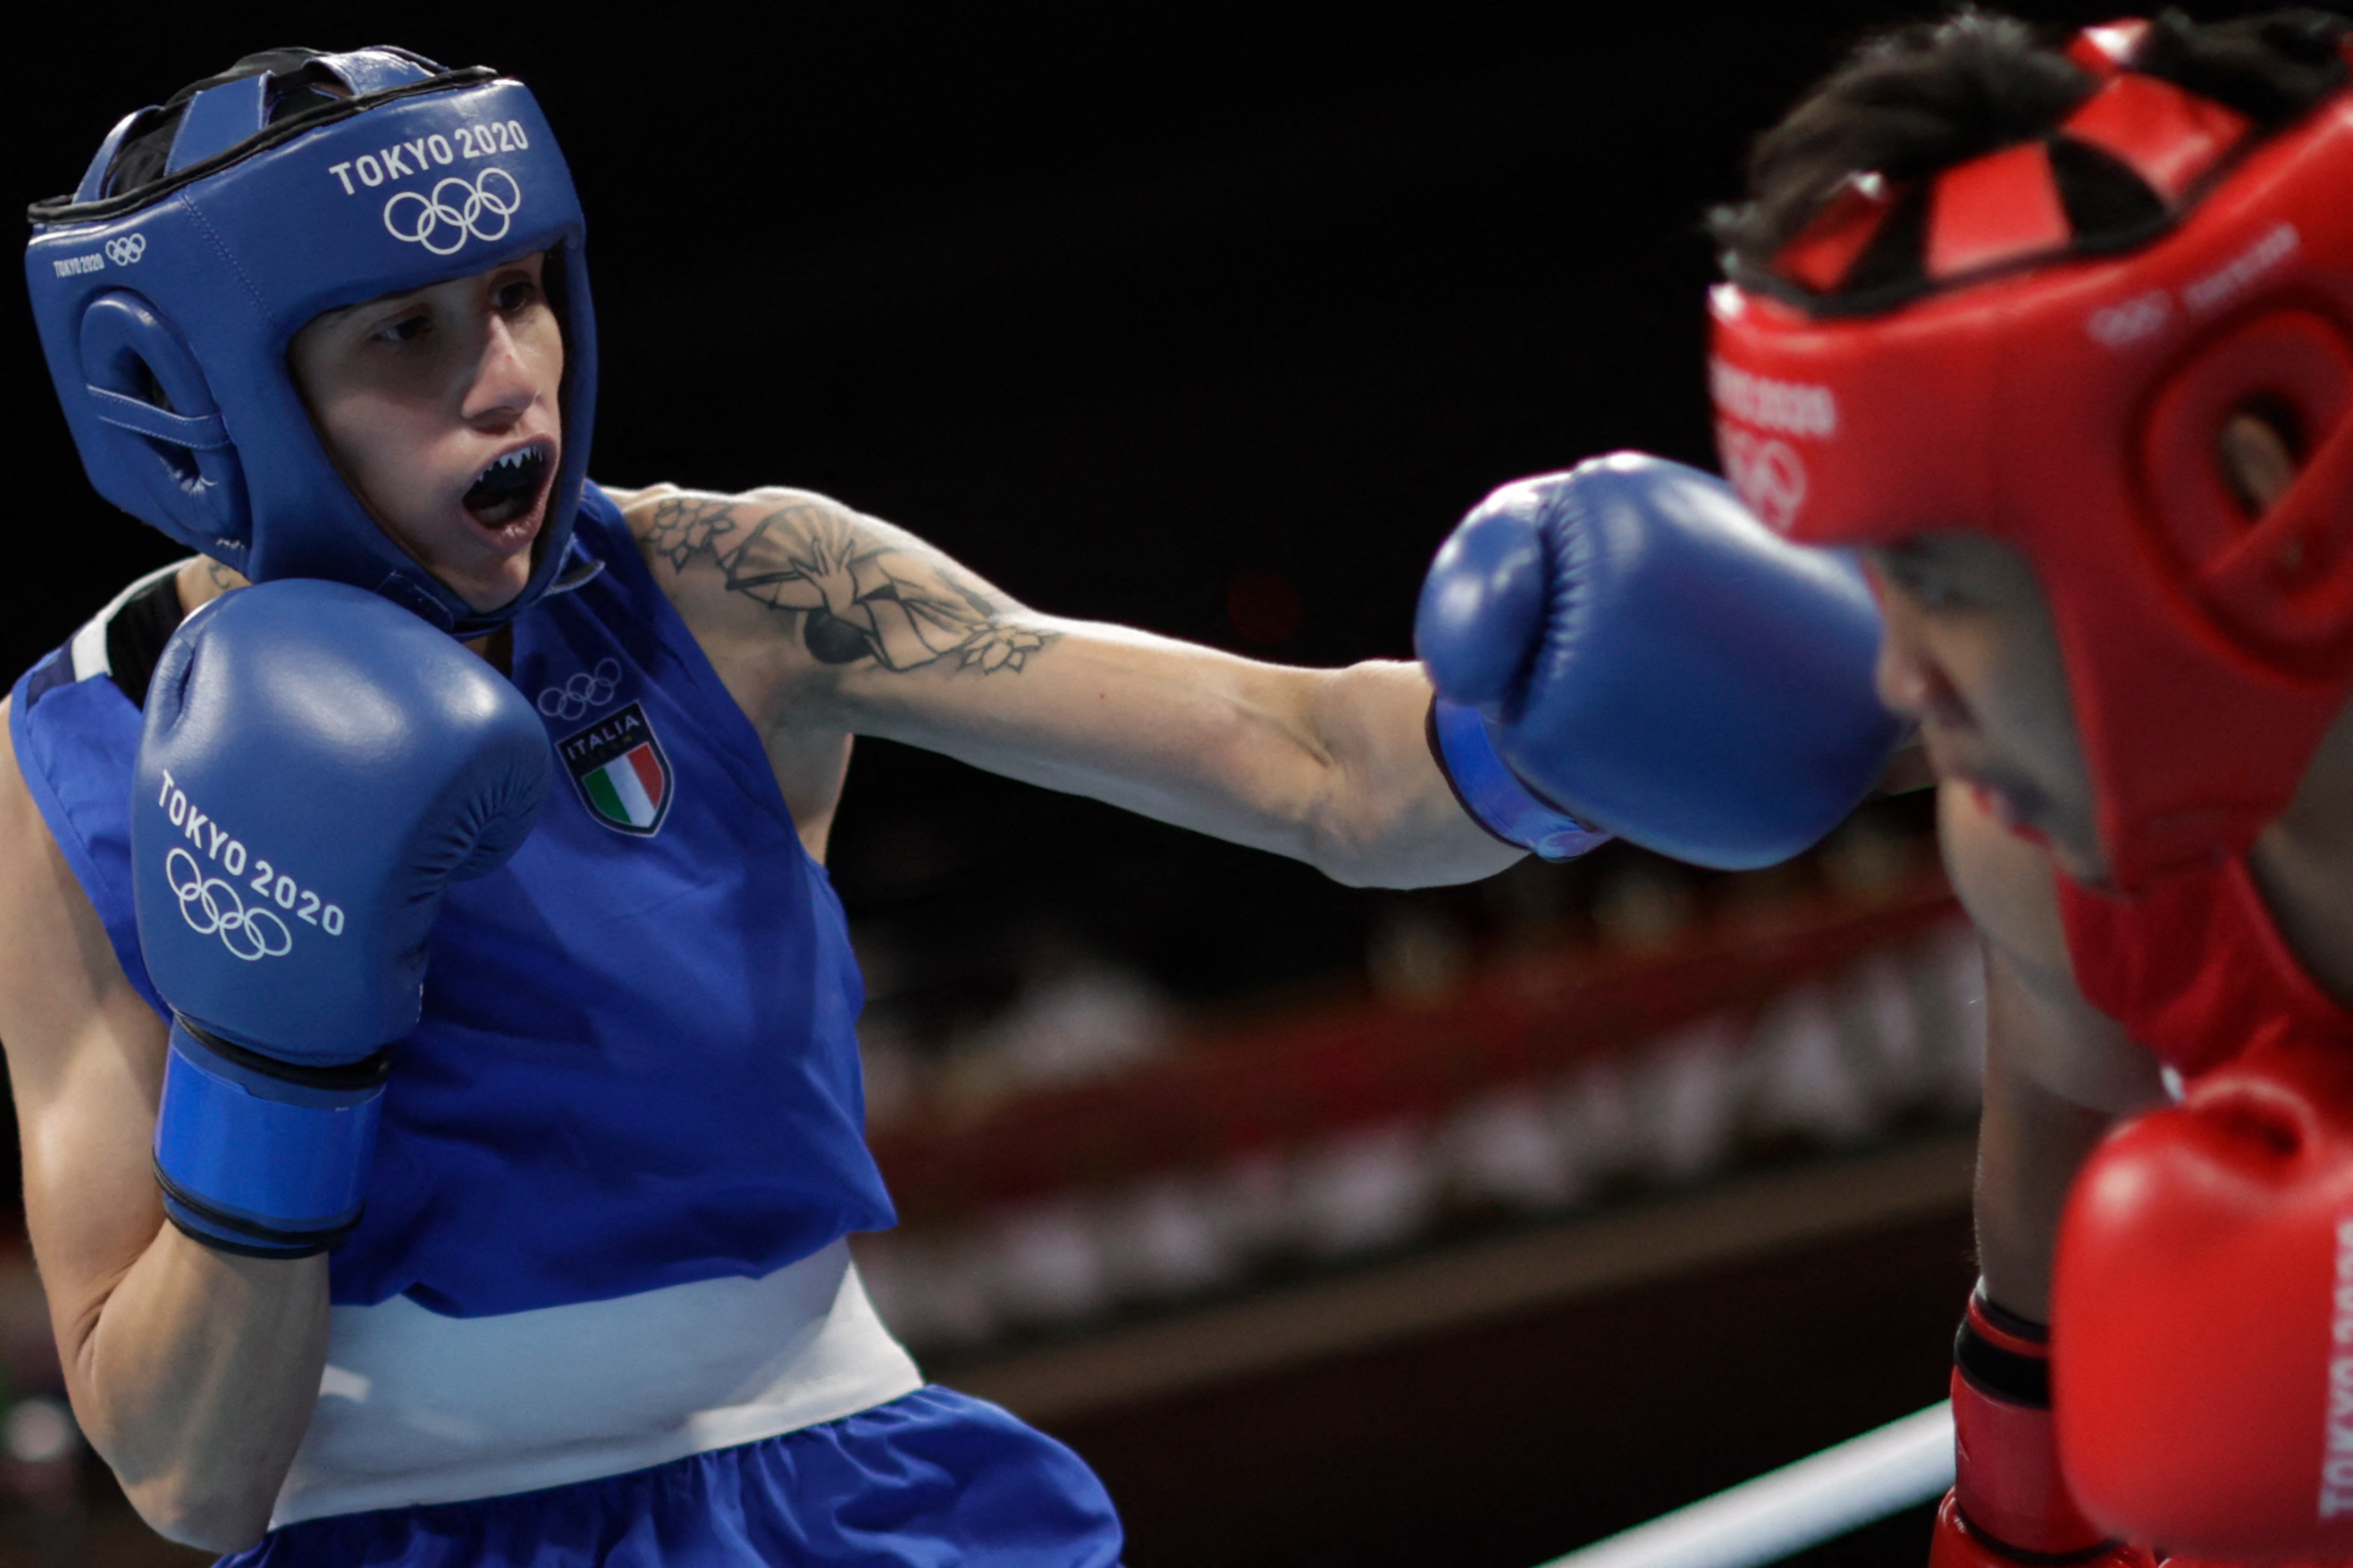 Philippines' Nesthy Petecio (red) and Italy's Irma Testa fight during their women's feather (54-57kg) semi-final boxing match during the Tokyo 2020 Olympic Games at the Kokugikan Arena in Tokyo on July 31, 2021. (Photo by UESLEI MARCELINO / POOL / AFP)